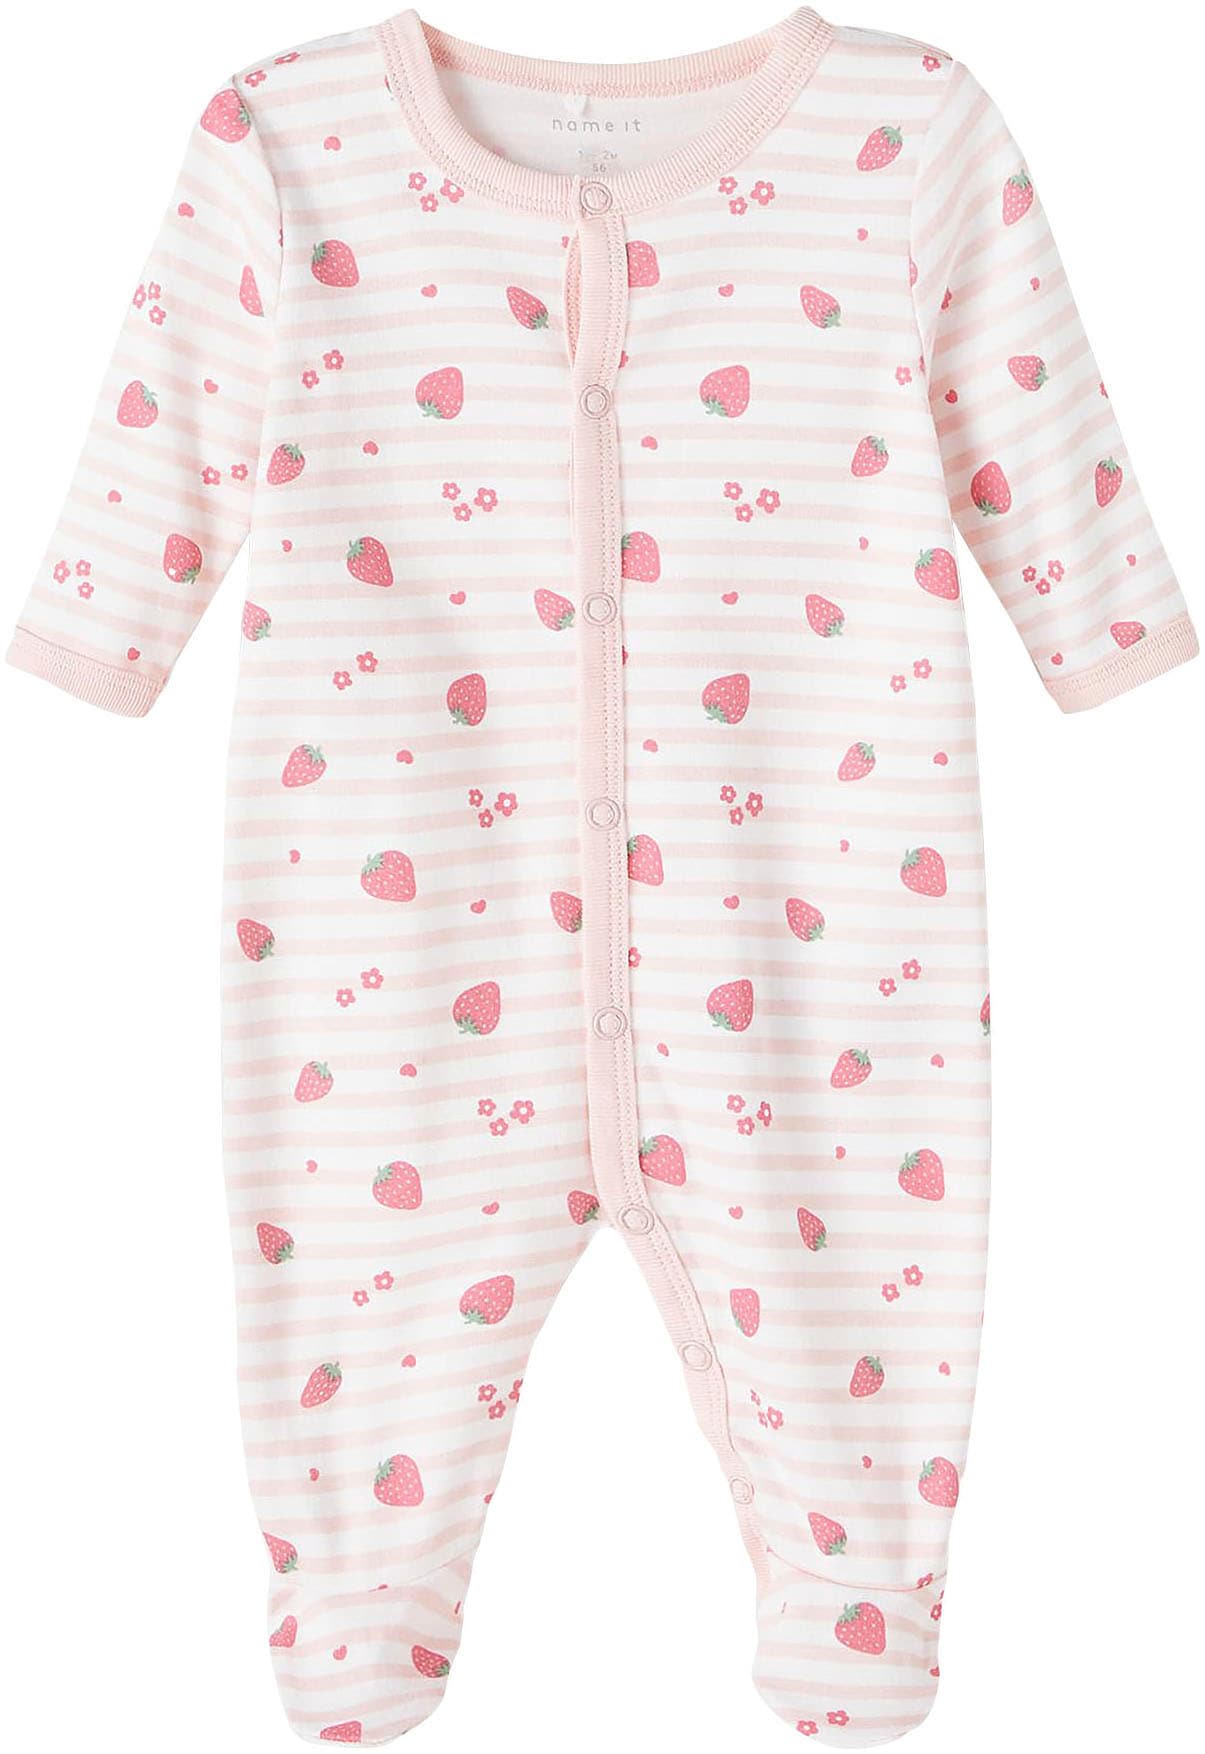 STRAWBERRY NOOS«, »NBFNIGHTSUIT OTTO bei Name It 2P W/F 2 kaufen (Packung, Schlafoverall tlg.)